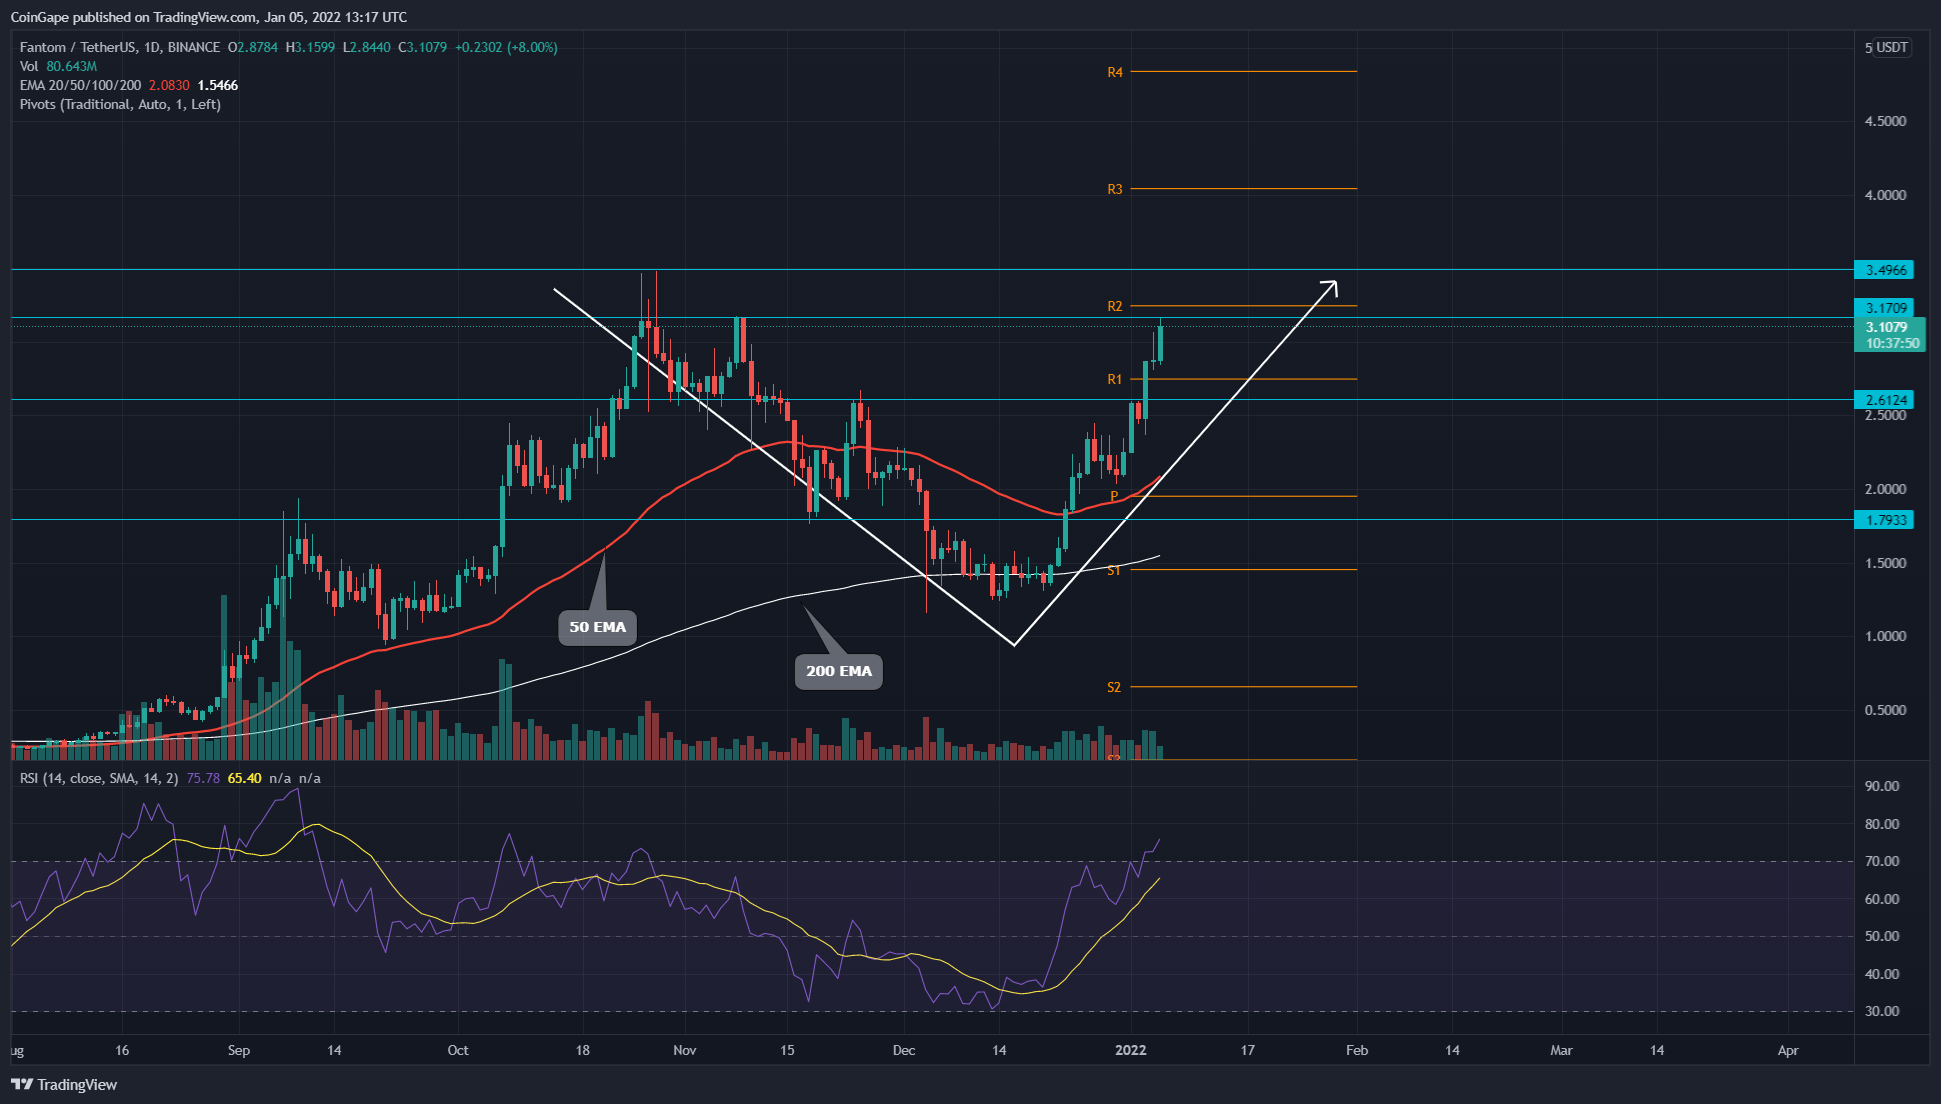 FTM Coin Price Analysis: V-shaped recovery aims to challenge $3.47 ATH